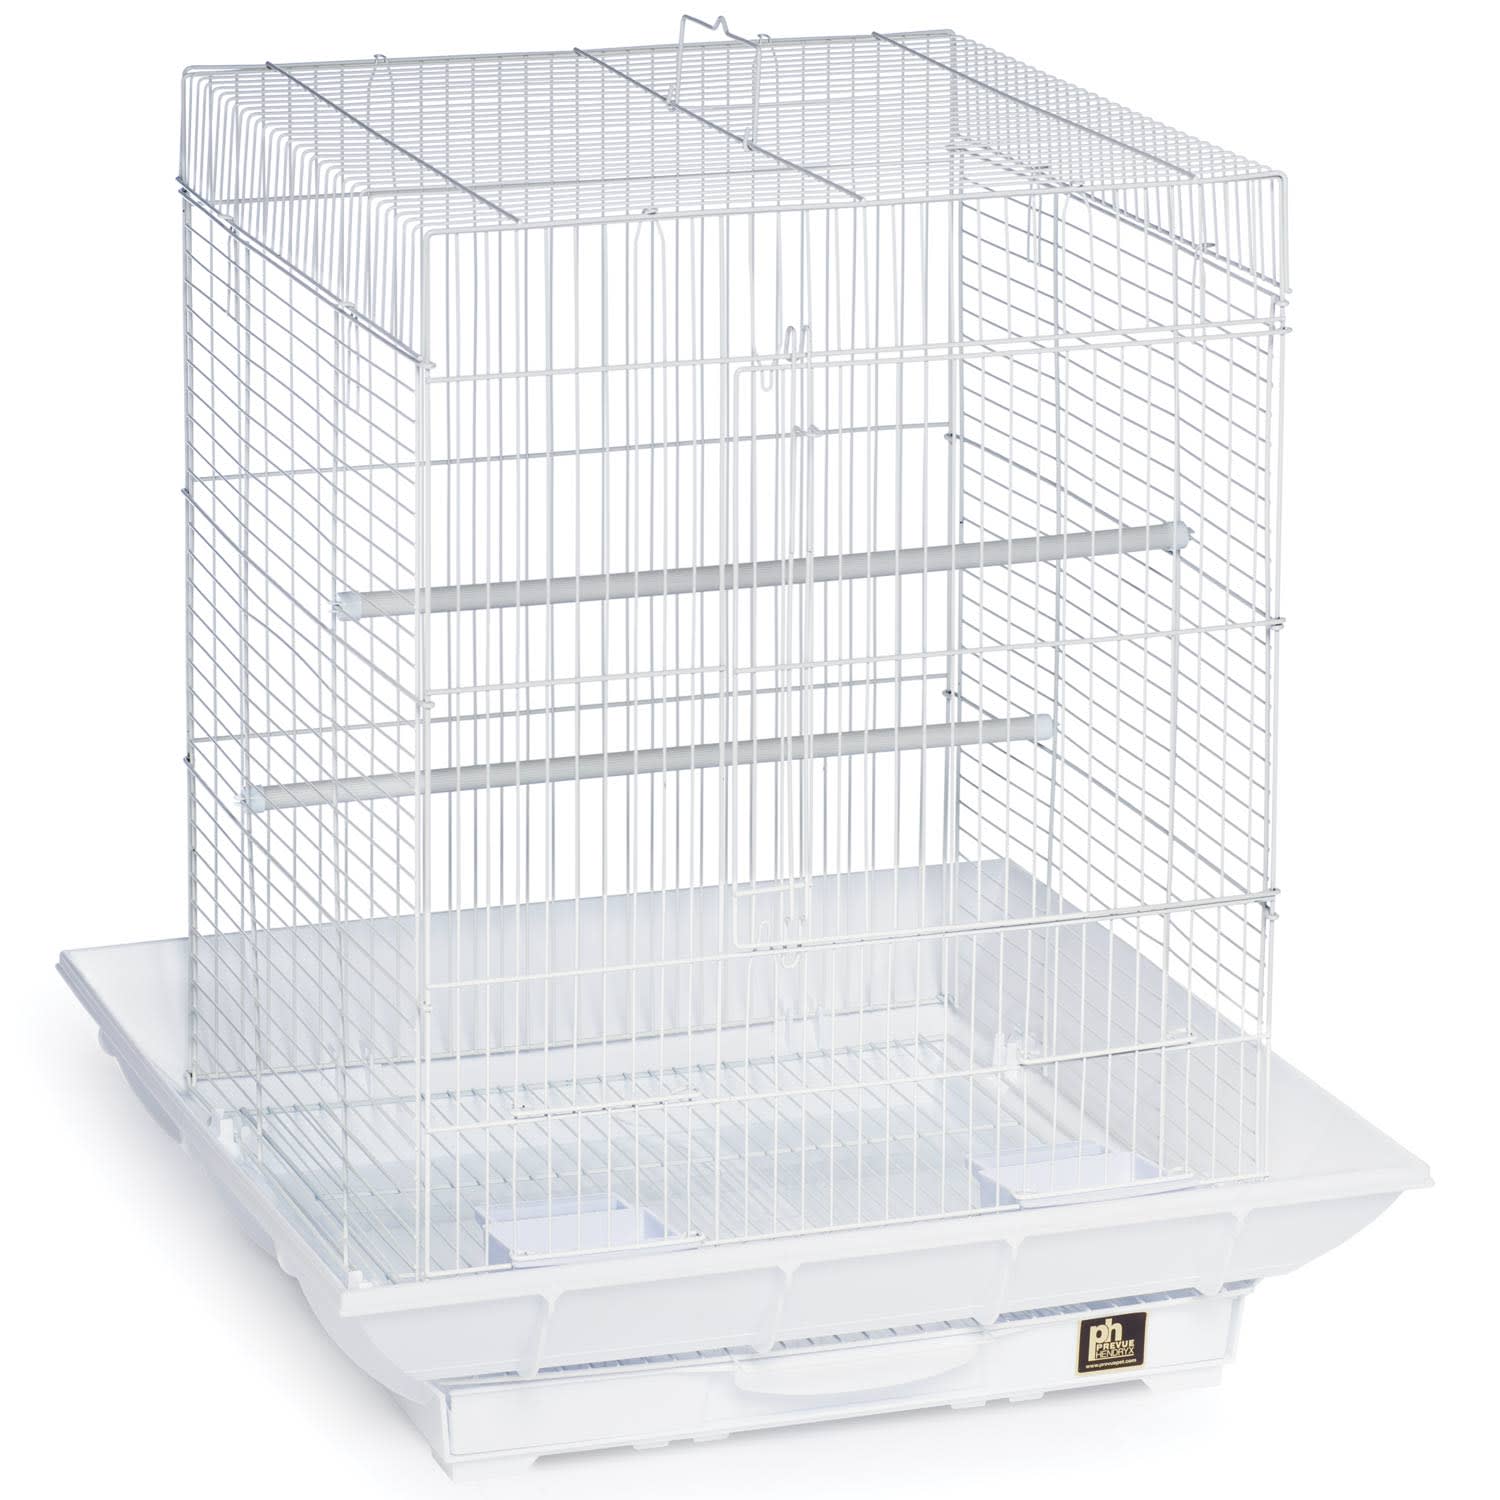 Photos - Bird Сage Prevue Pet Products Clean Life Series White Bird Cage, 